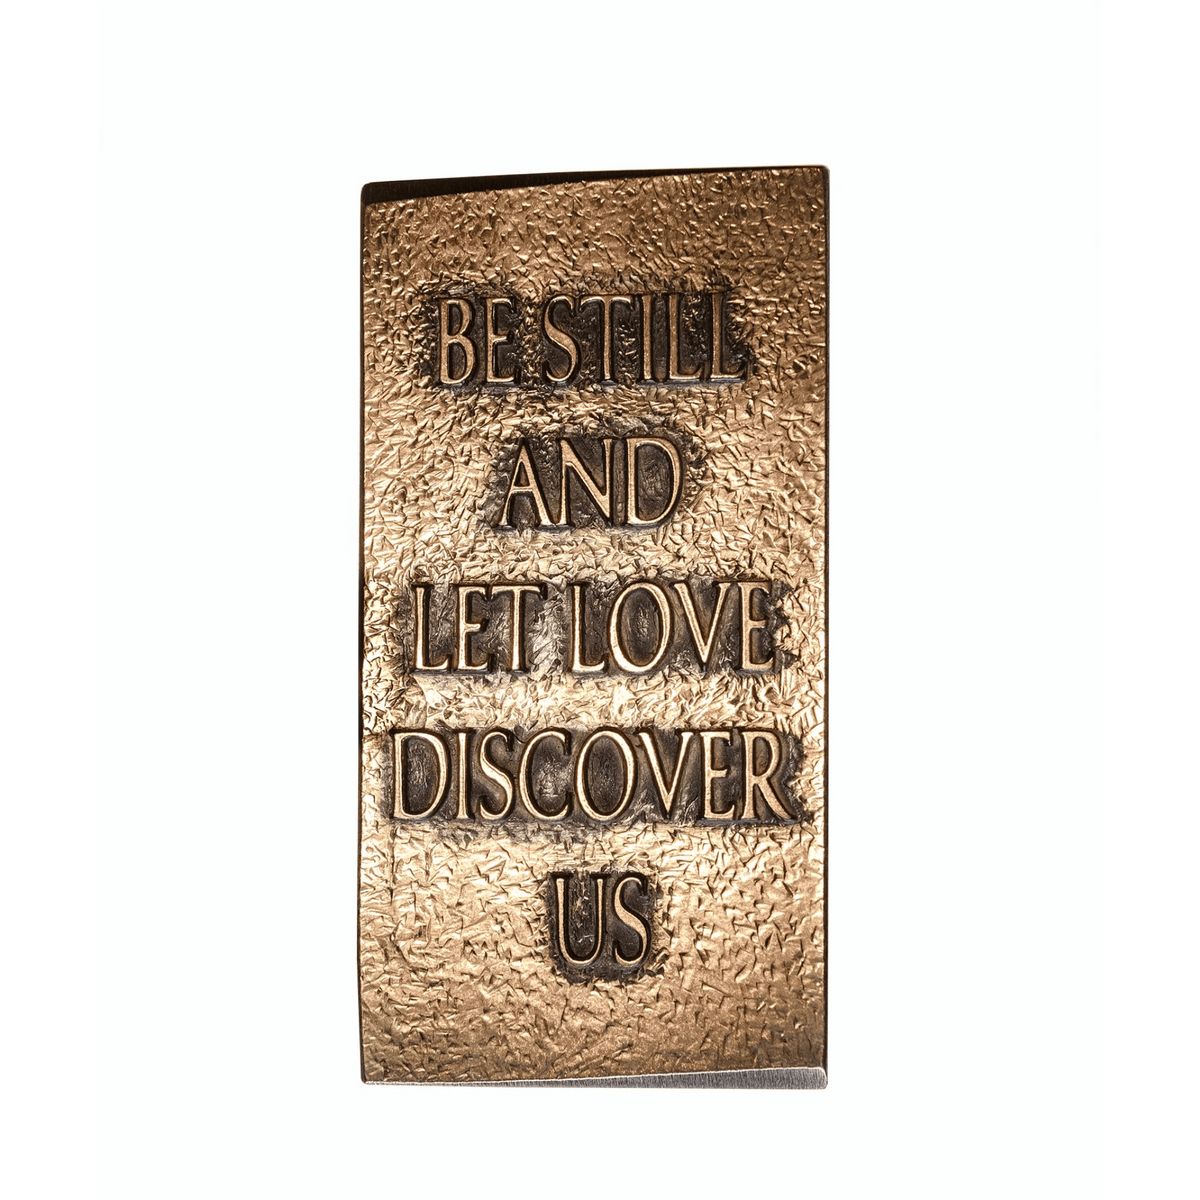 Be still and let love discover us (wall plaque)